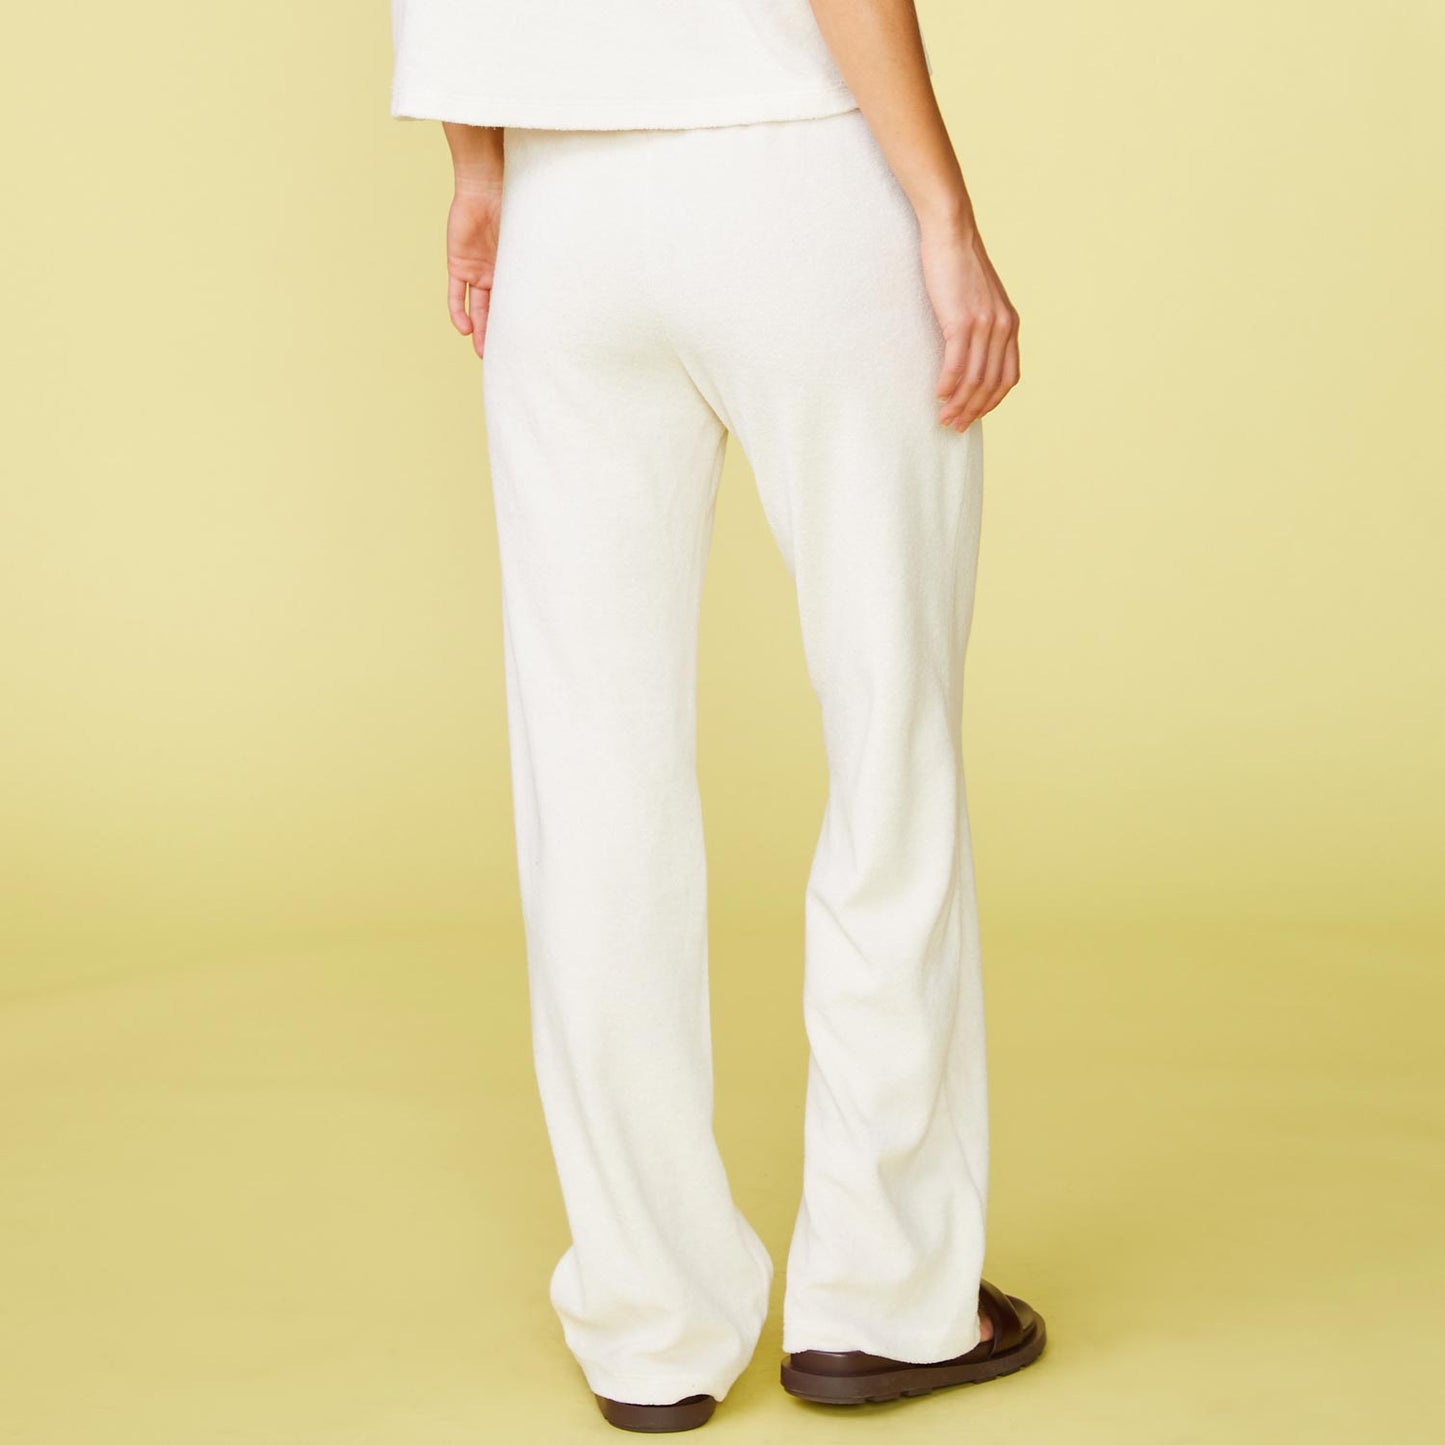 Back View of model wearing the Terry Cloth Patch Pocket Pant in Pearl